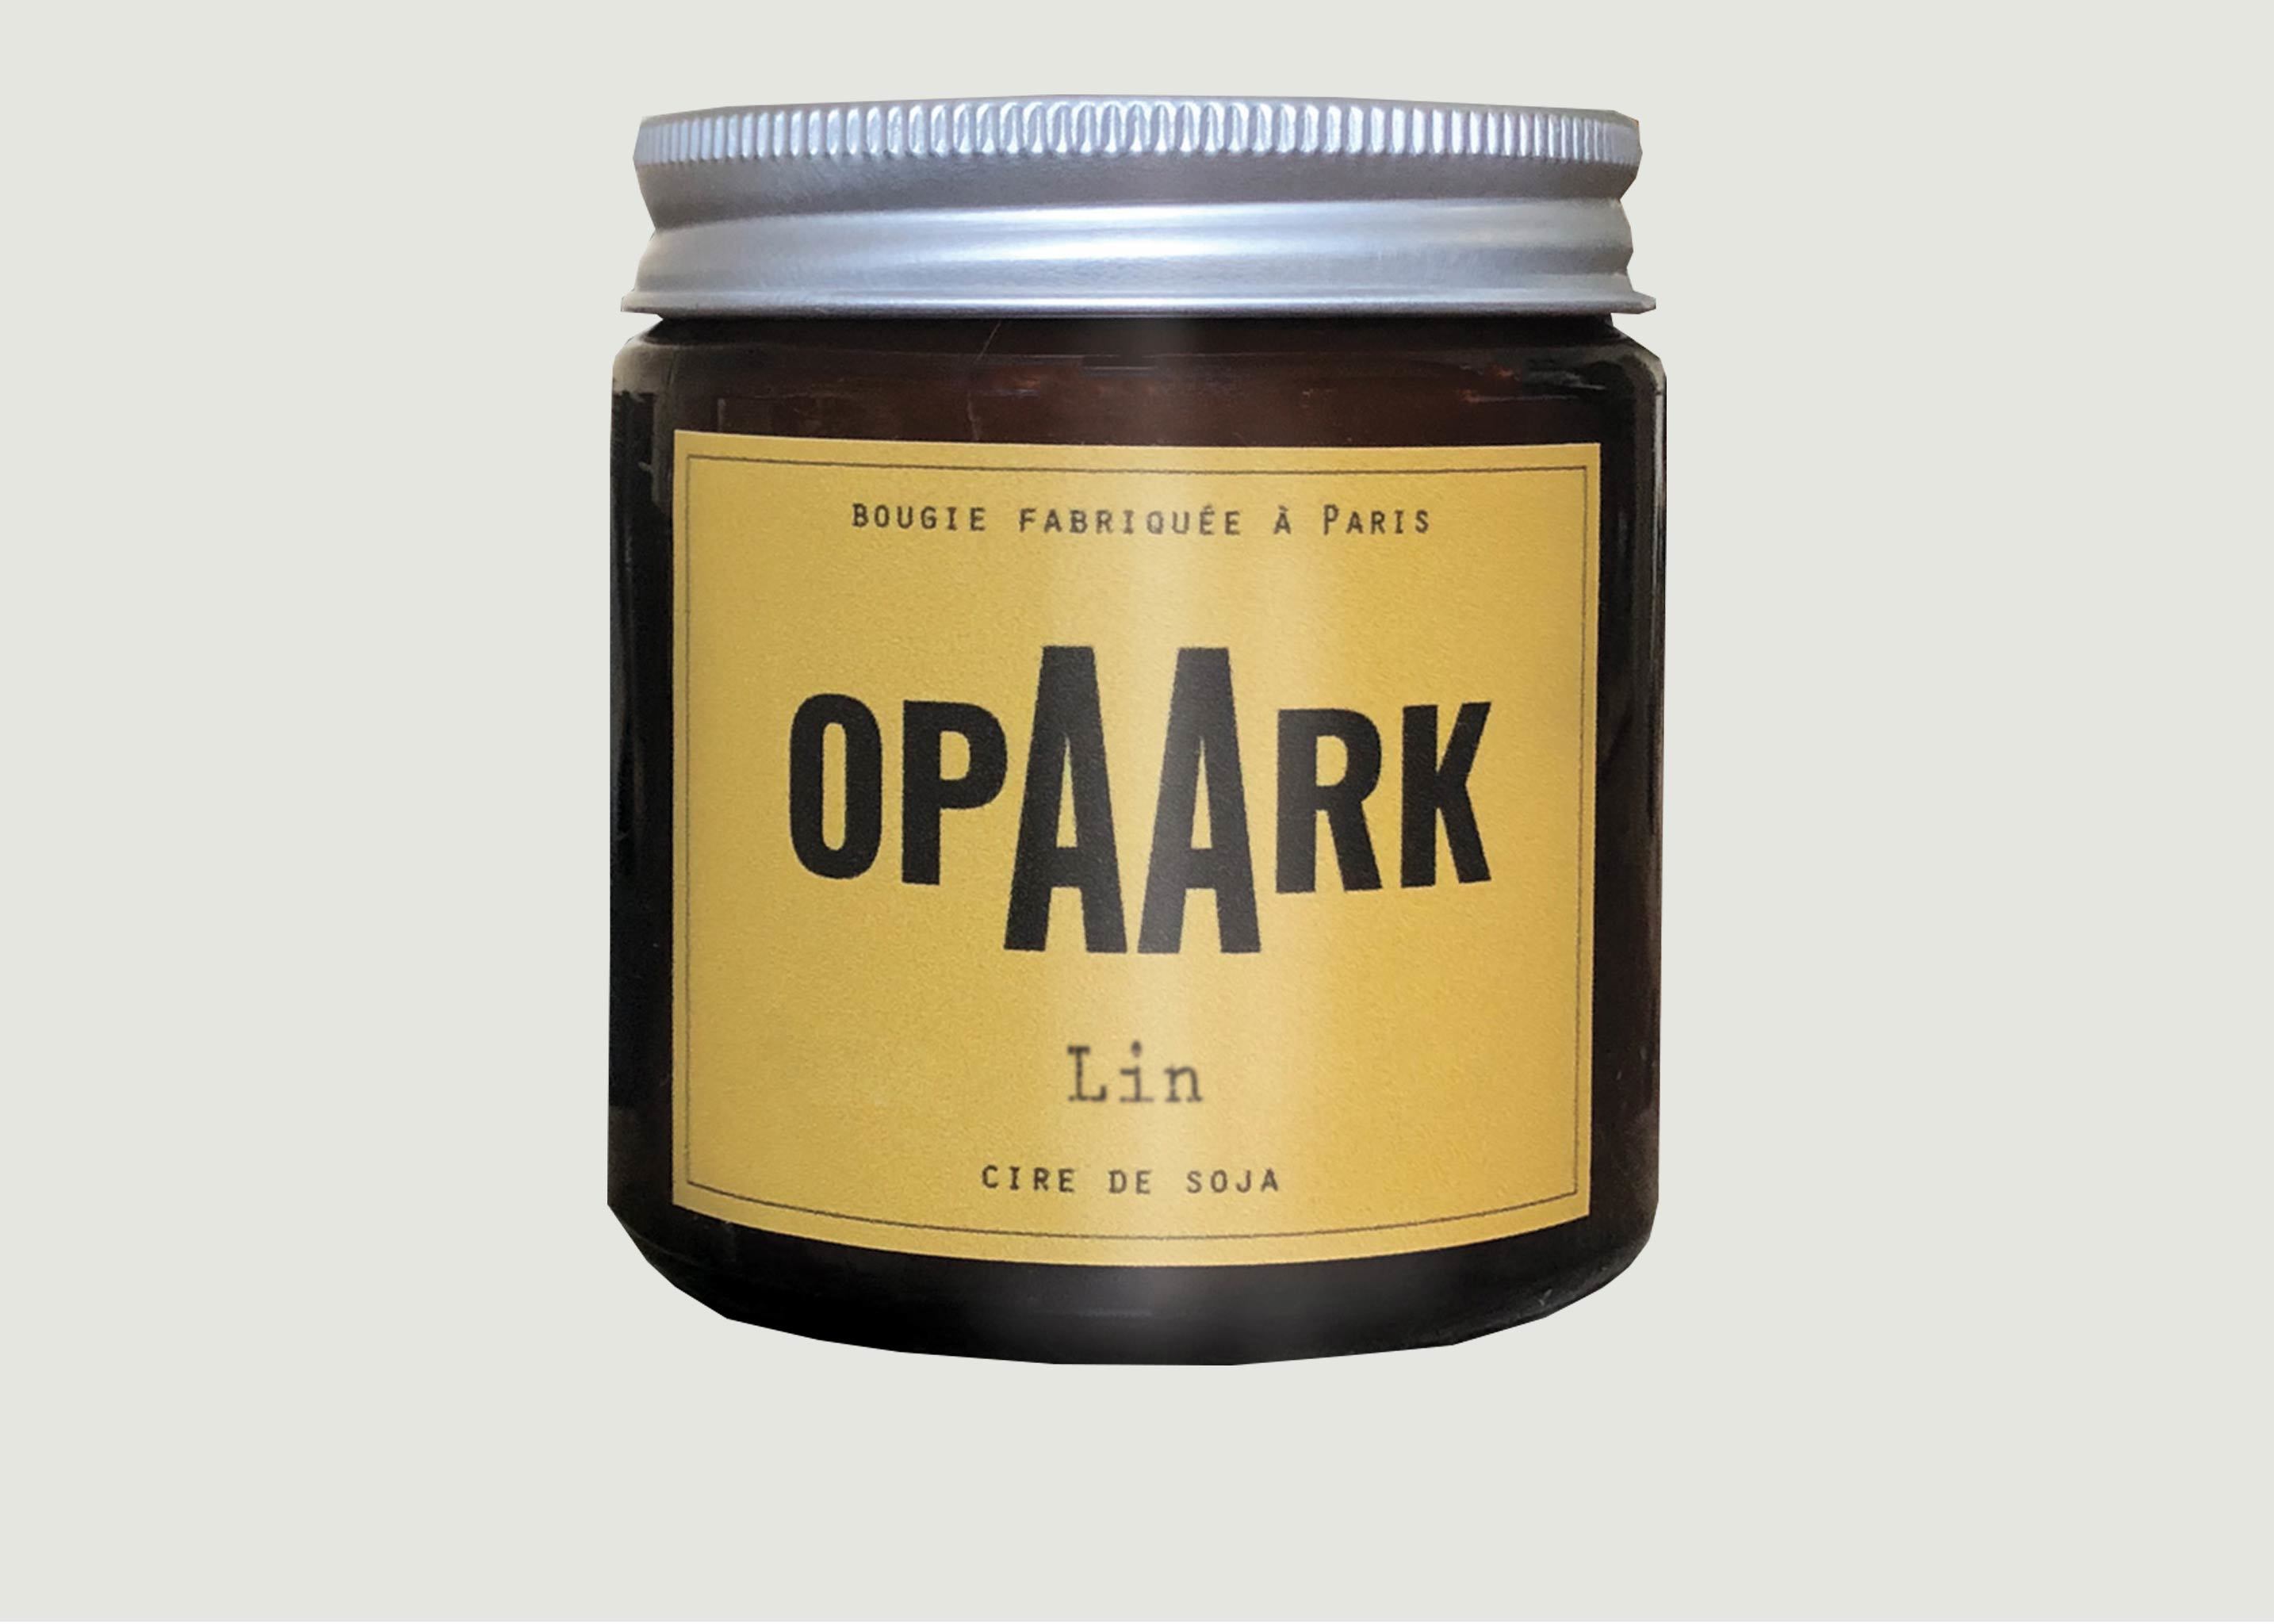 90g Lined Scented Candle - OPAARK